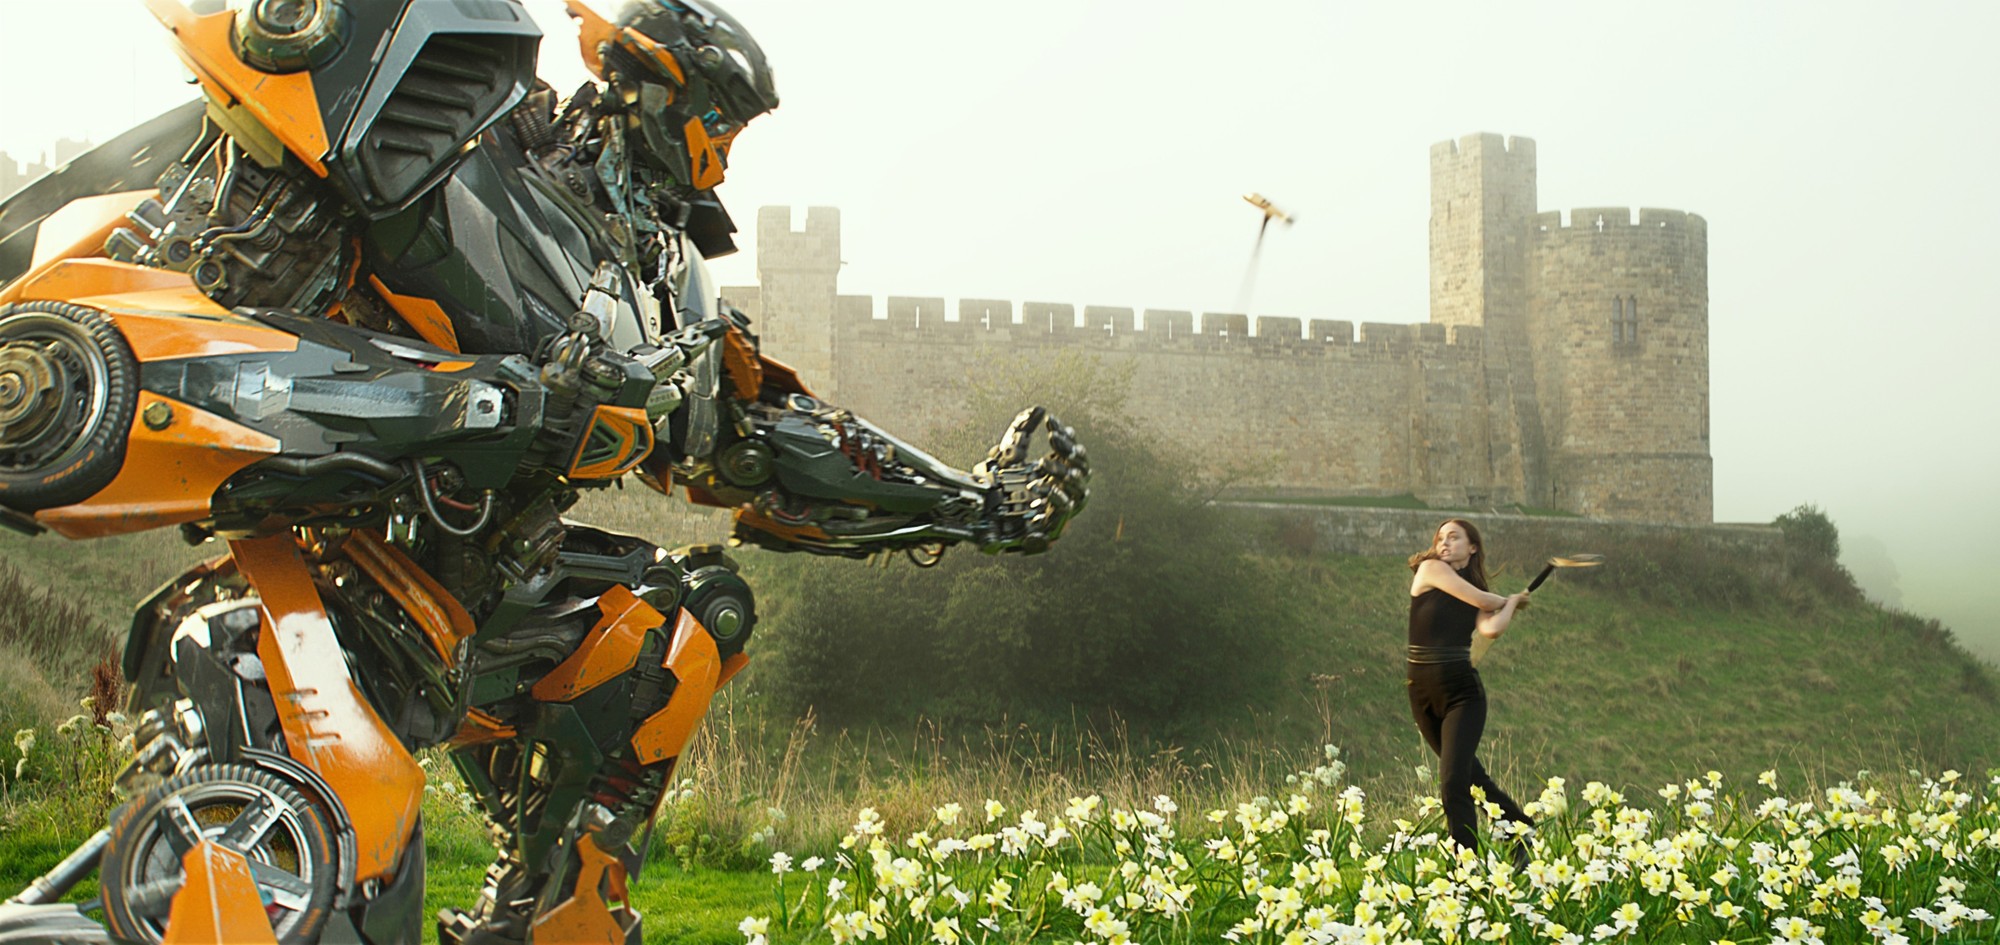 Hot Rod and Laura Haddock (Vivian Wembley) in Paramount Pictures' Transformers: The Last Knight (2017)